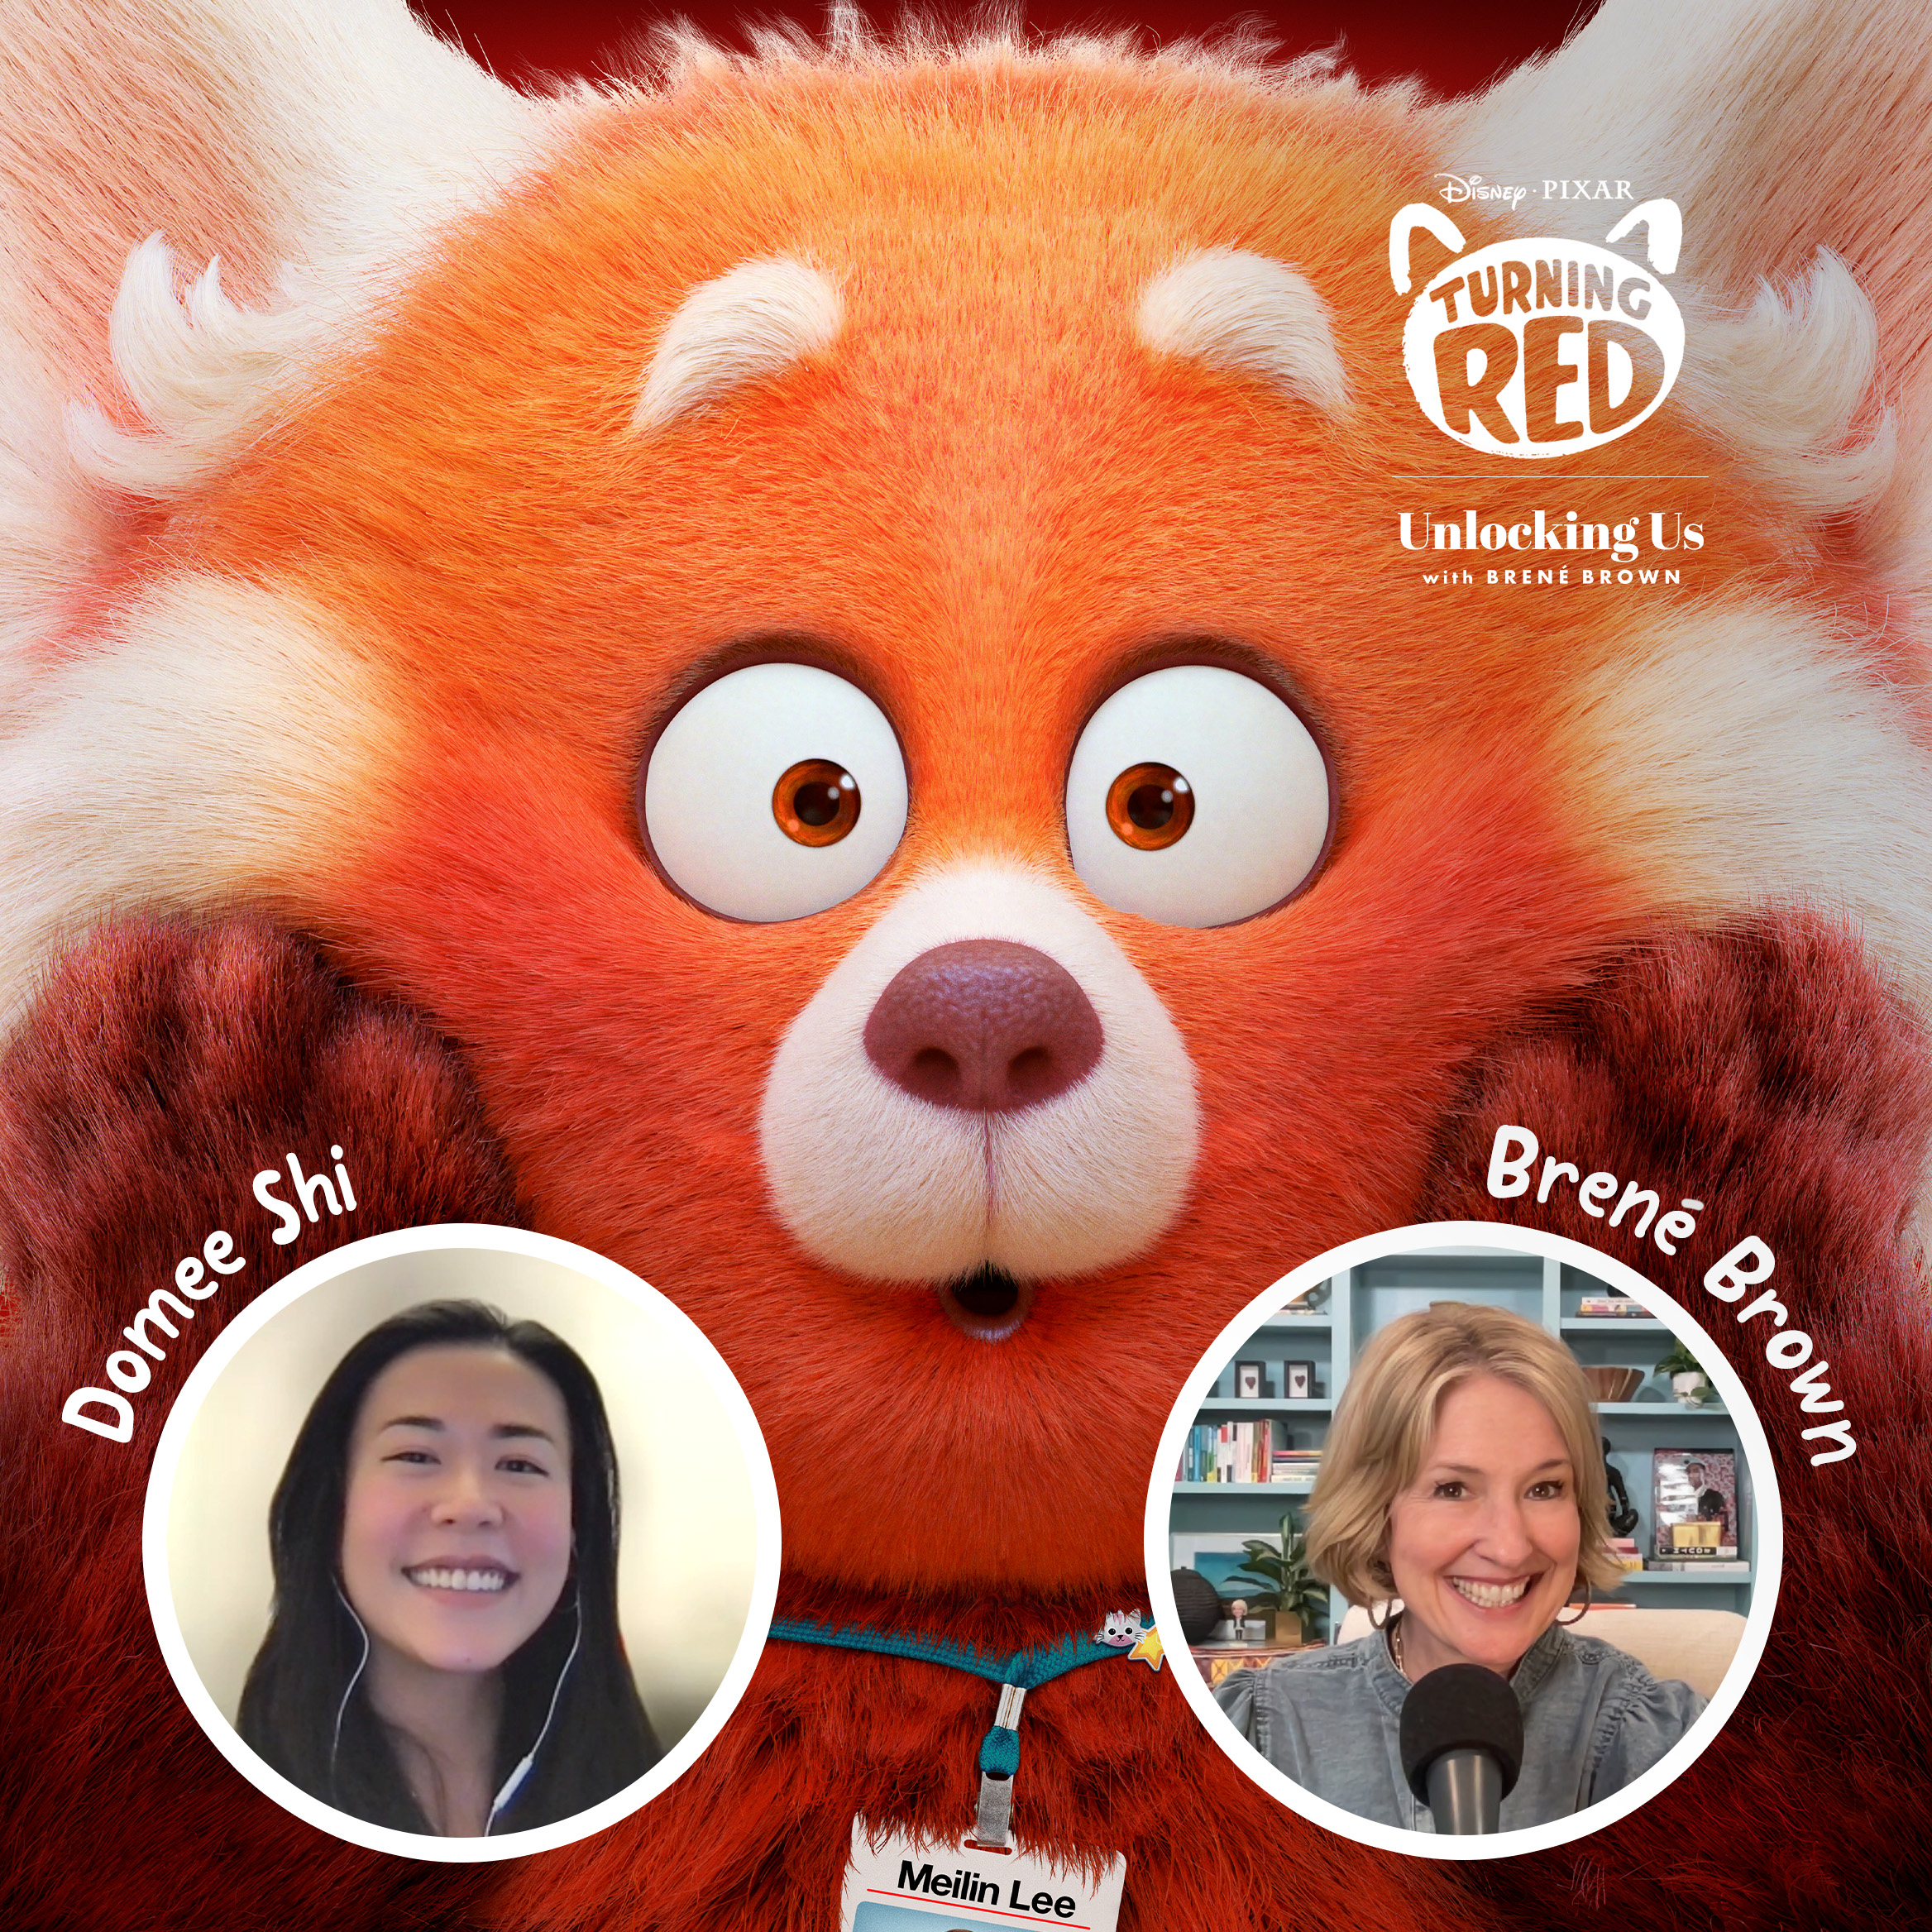 Domee Shi, the director of Turning Red, and Brené Brown on the Unlocking Us podcast.